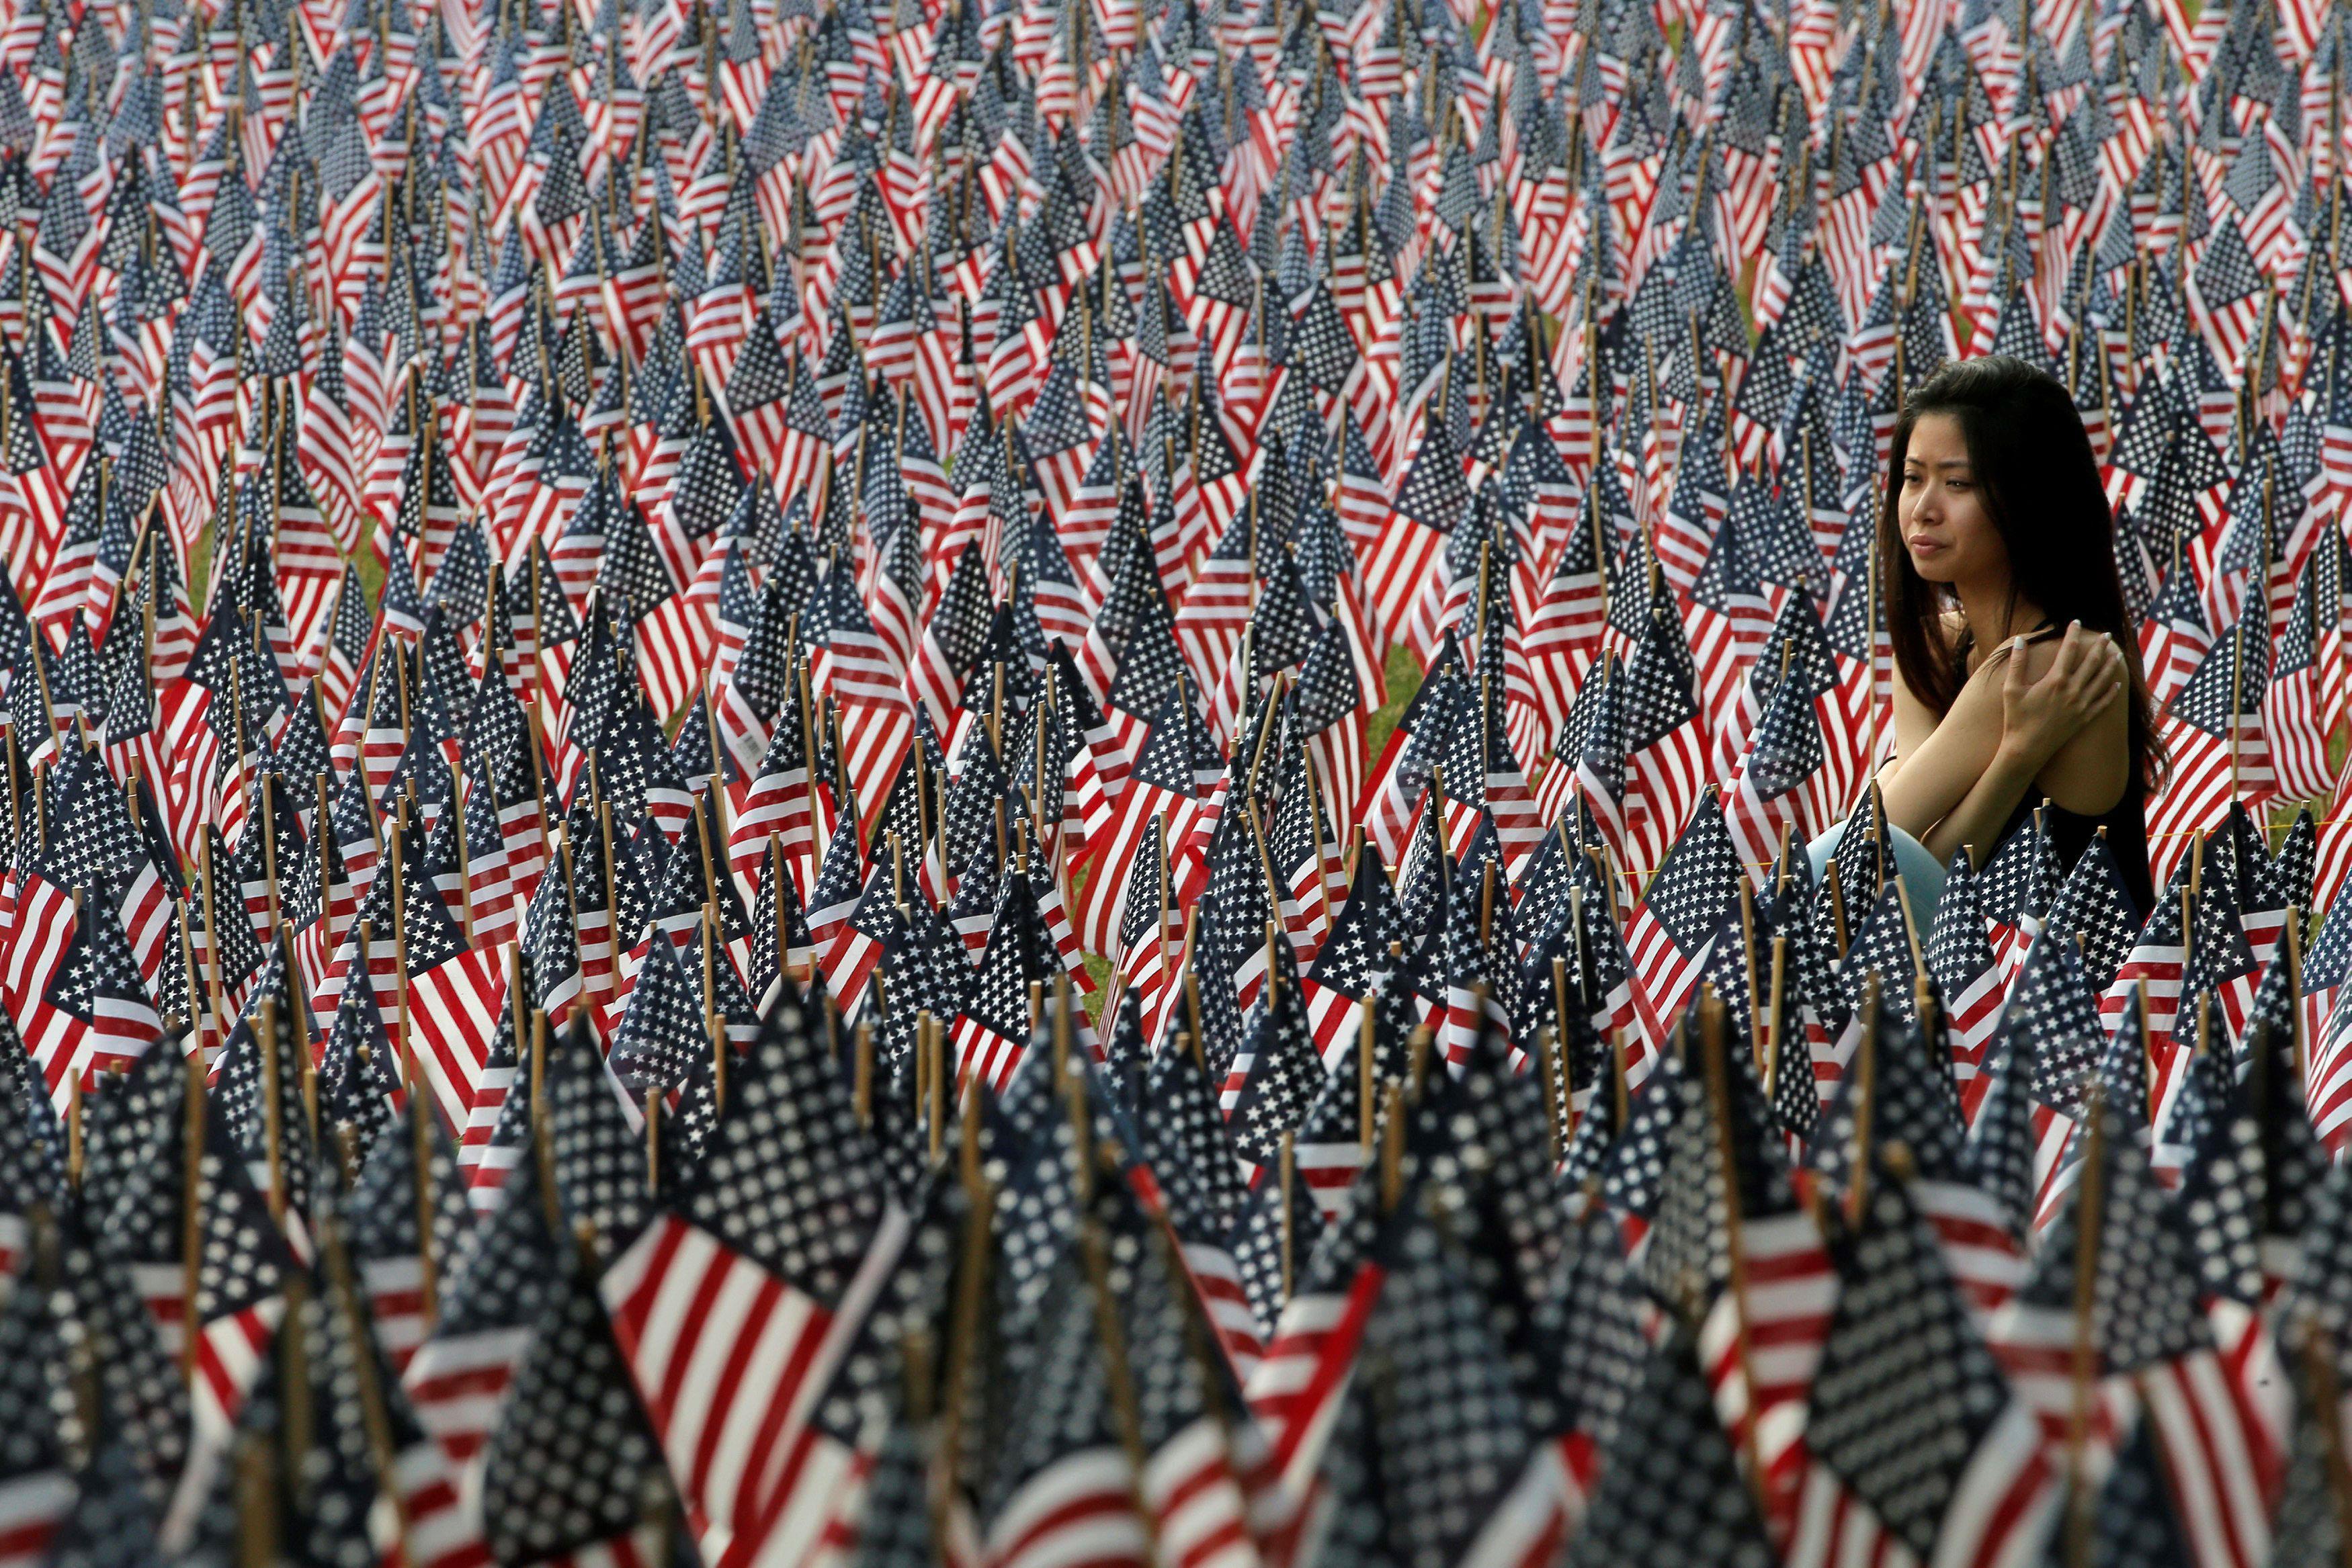 A woman sits at the edge of the field of United States flags displayed by the Massachusetts Military